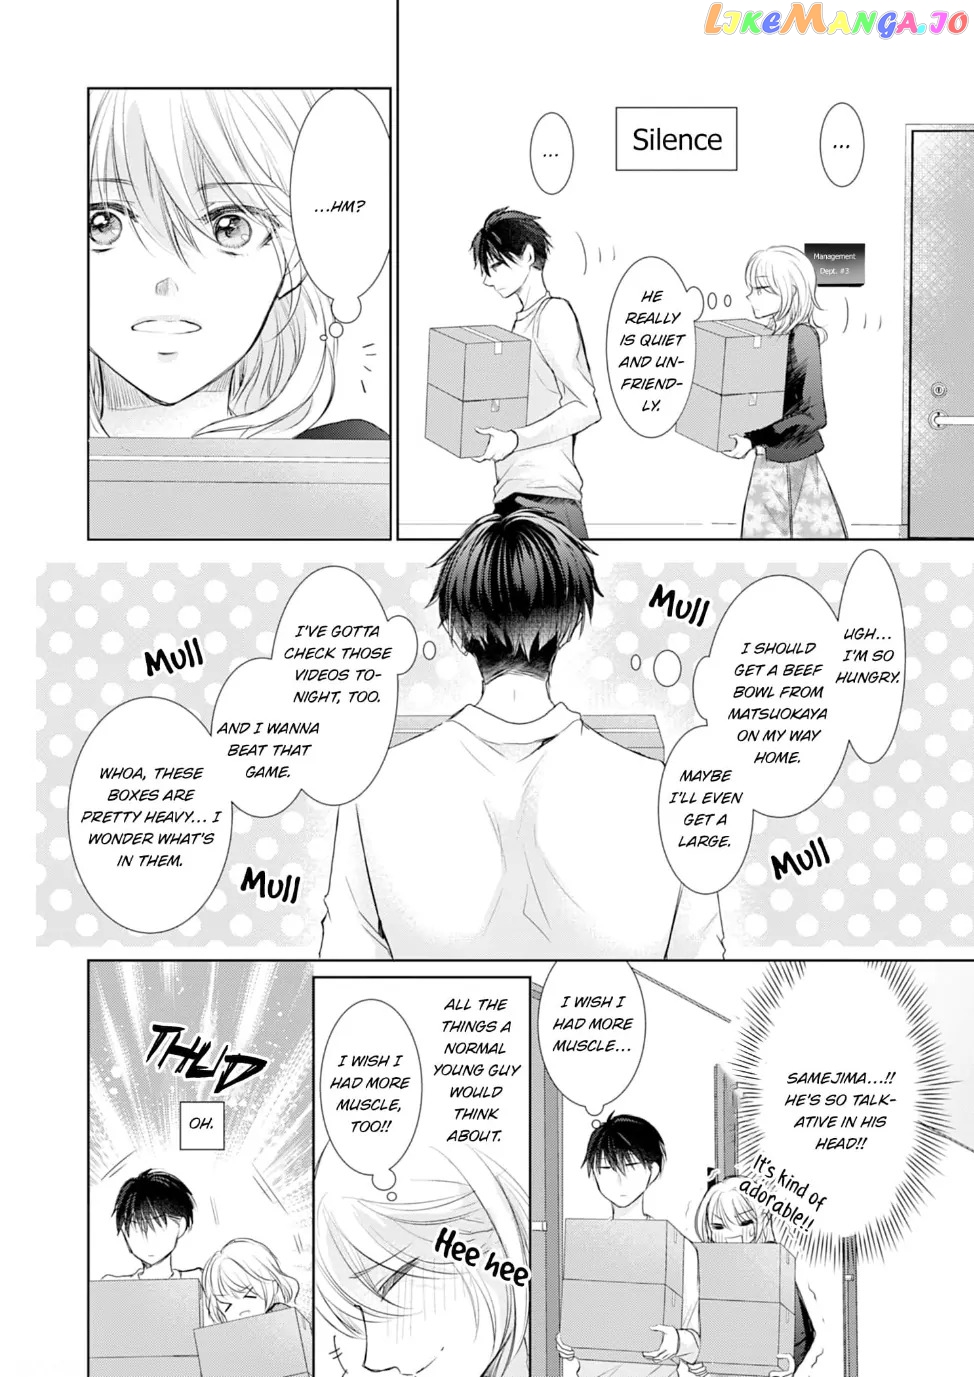 My Quiet Younger Boyfriend's Inner Thoughts are So Naughty: Has He Always Looked at Me With Such Lustful Eyes? Chapter 1 - page 20